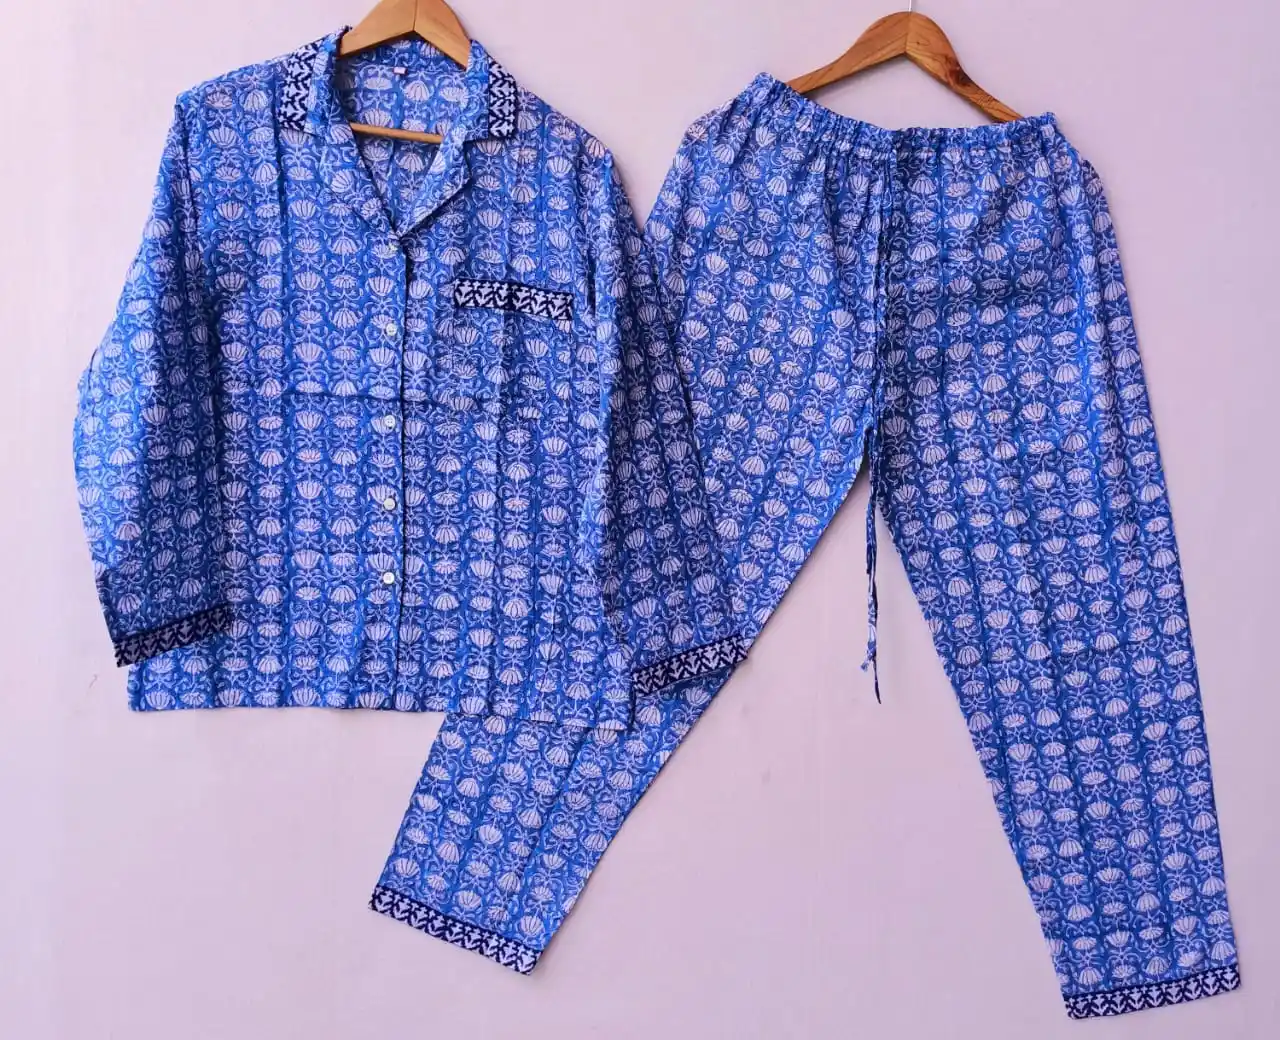 Hot Selling Trendings 2021 Unisex Woven Pajamas Home Wear 100% Cotton Hand Block Printed Floral Print Pajama Sets